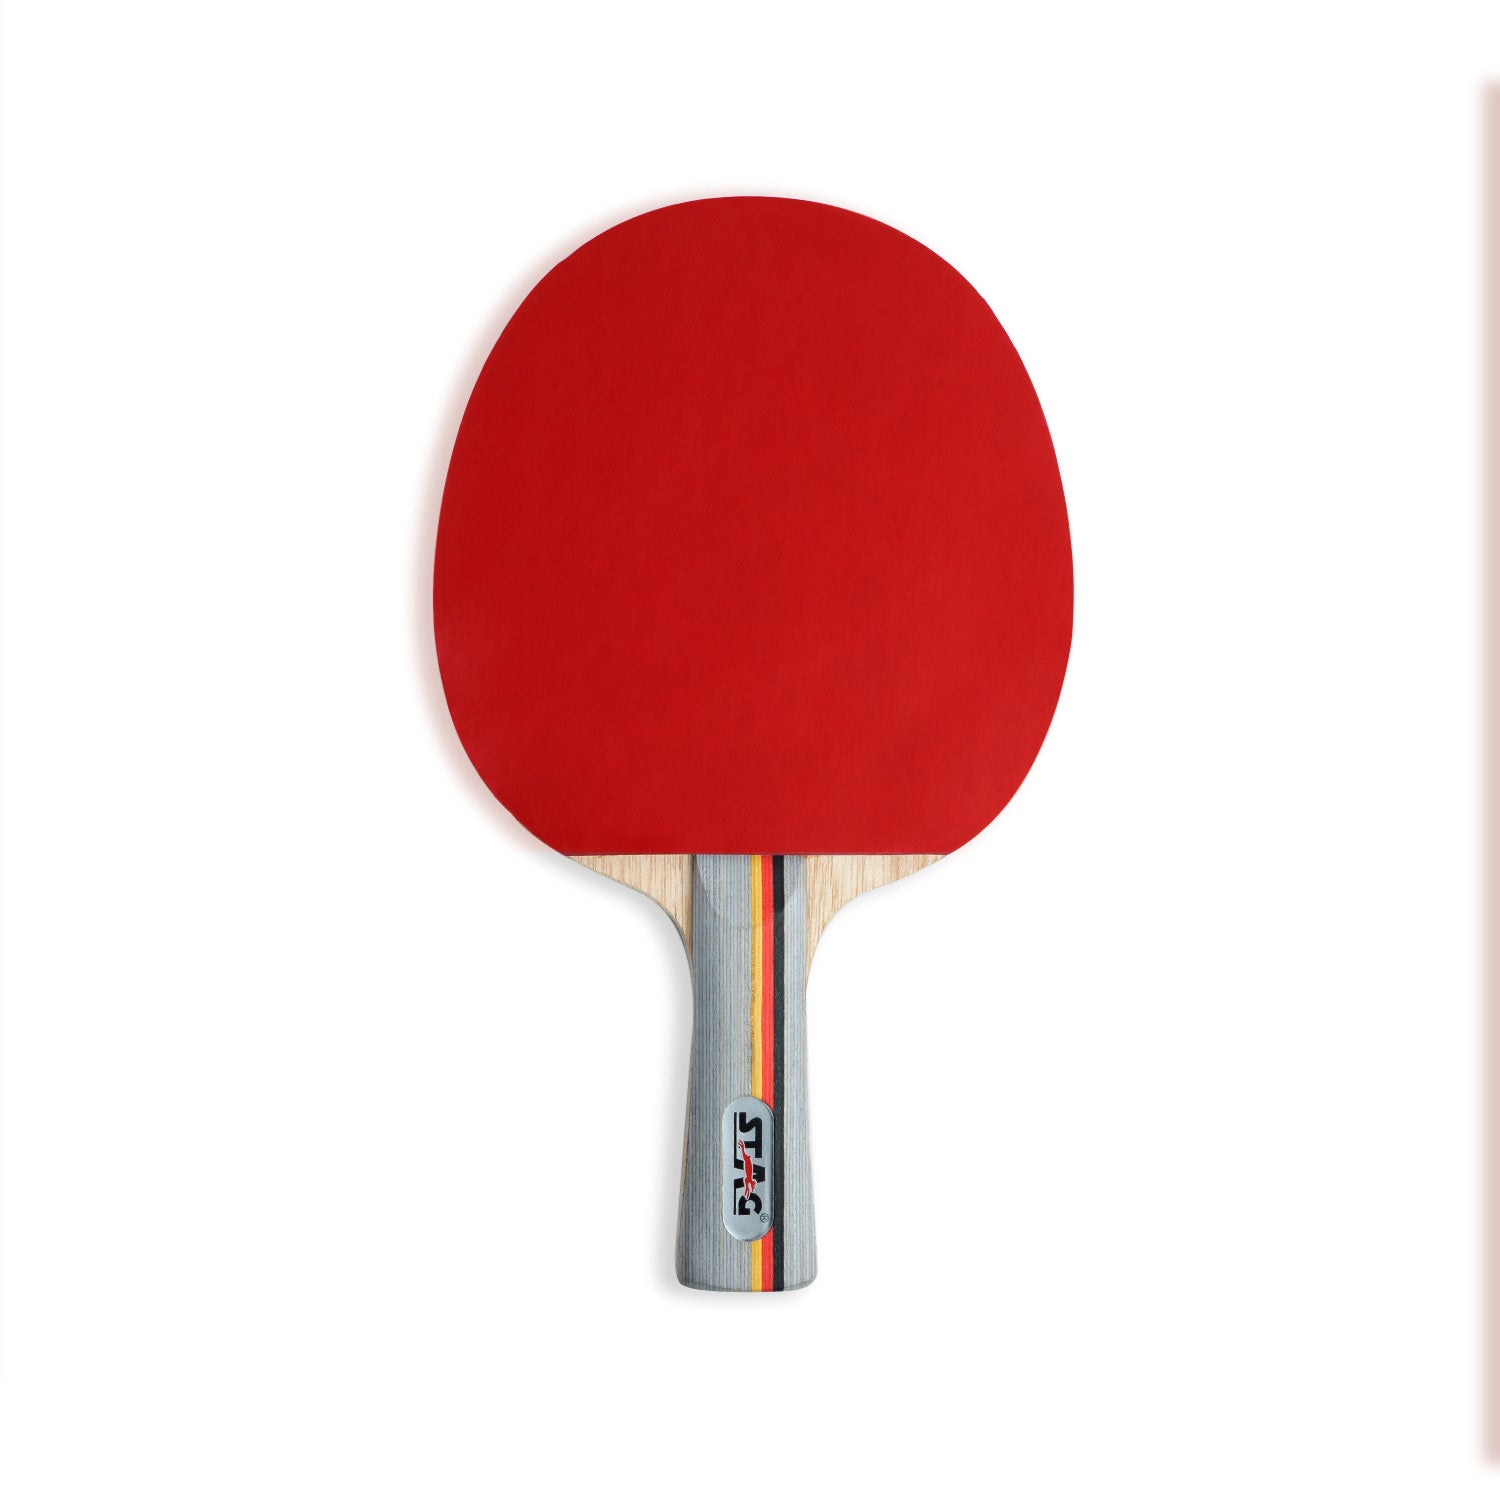 Stag Iconic Tournament Table Tennis Racquet